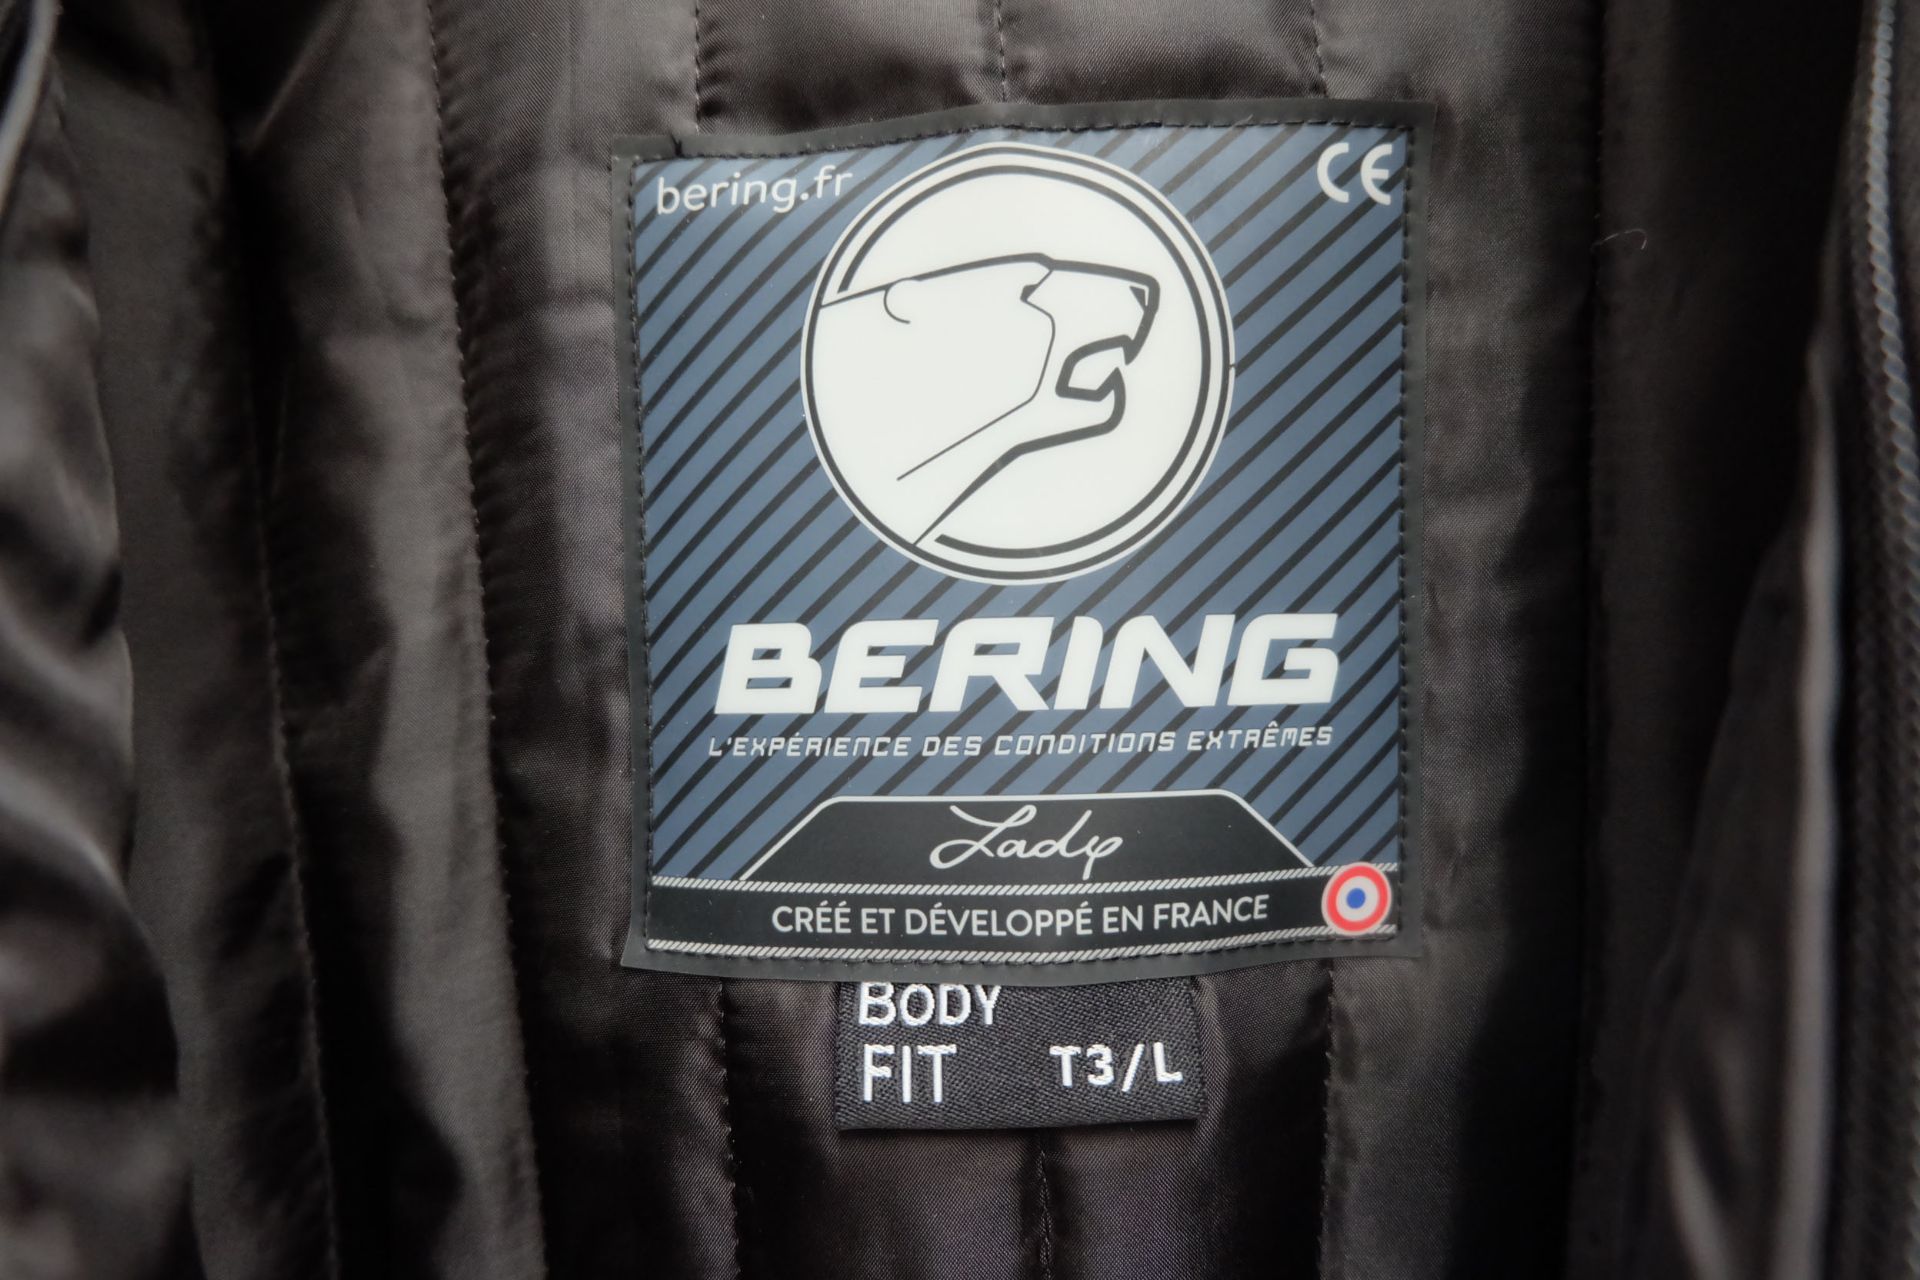 Bering Lady April Women's Waterproof Motorcycle Jacket. Size T3/L. Chest Size 95-98cm. - Image 4 of 8